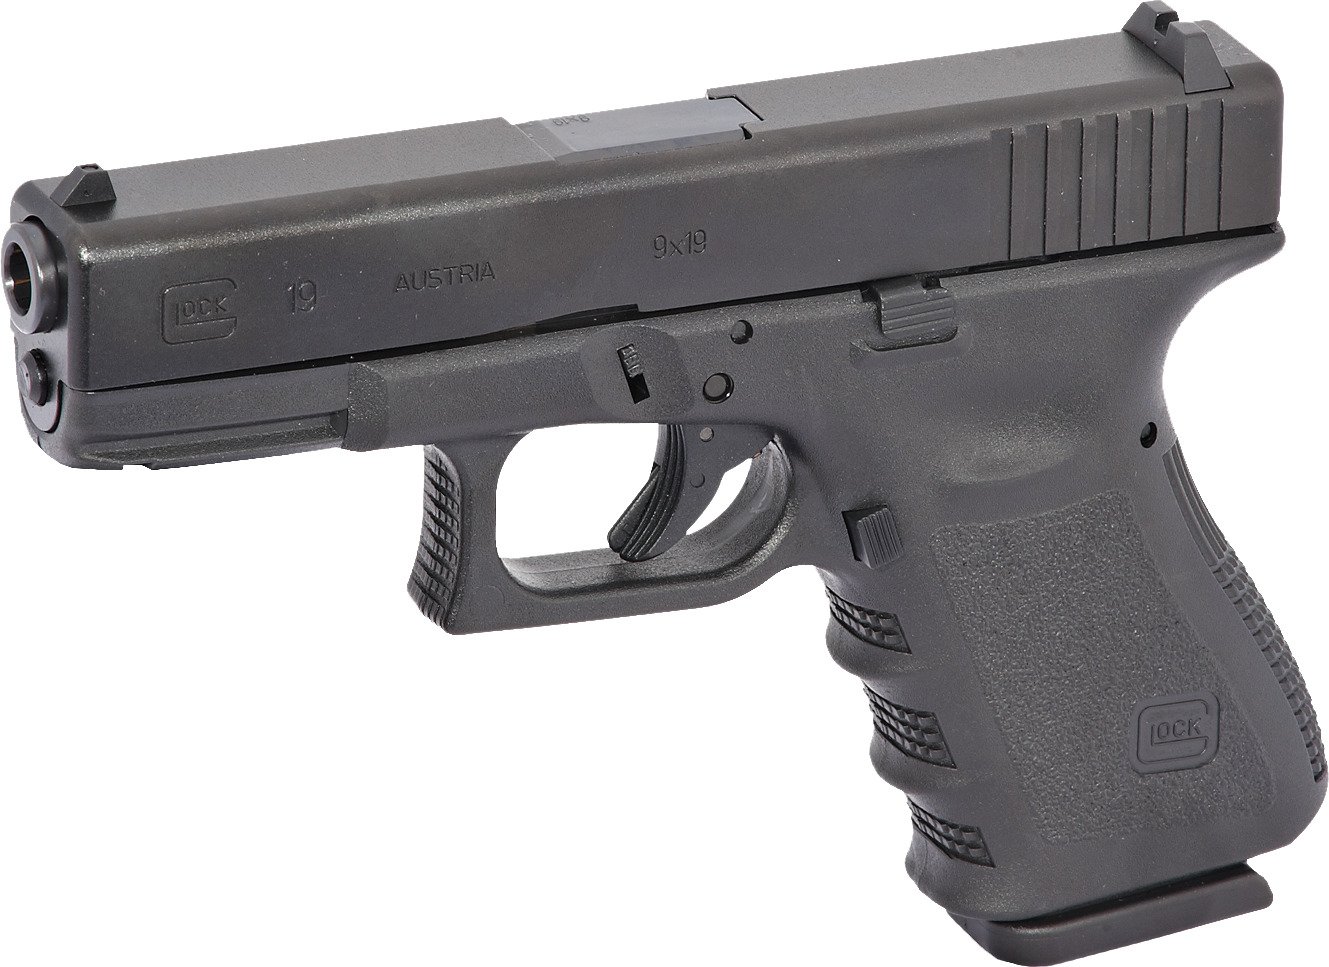 GLOCK 19 - G19 Gen3 9mm Compact Safe-Action Pistol                                                                               - view number 1 selected